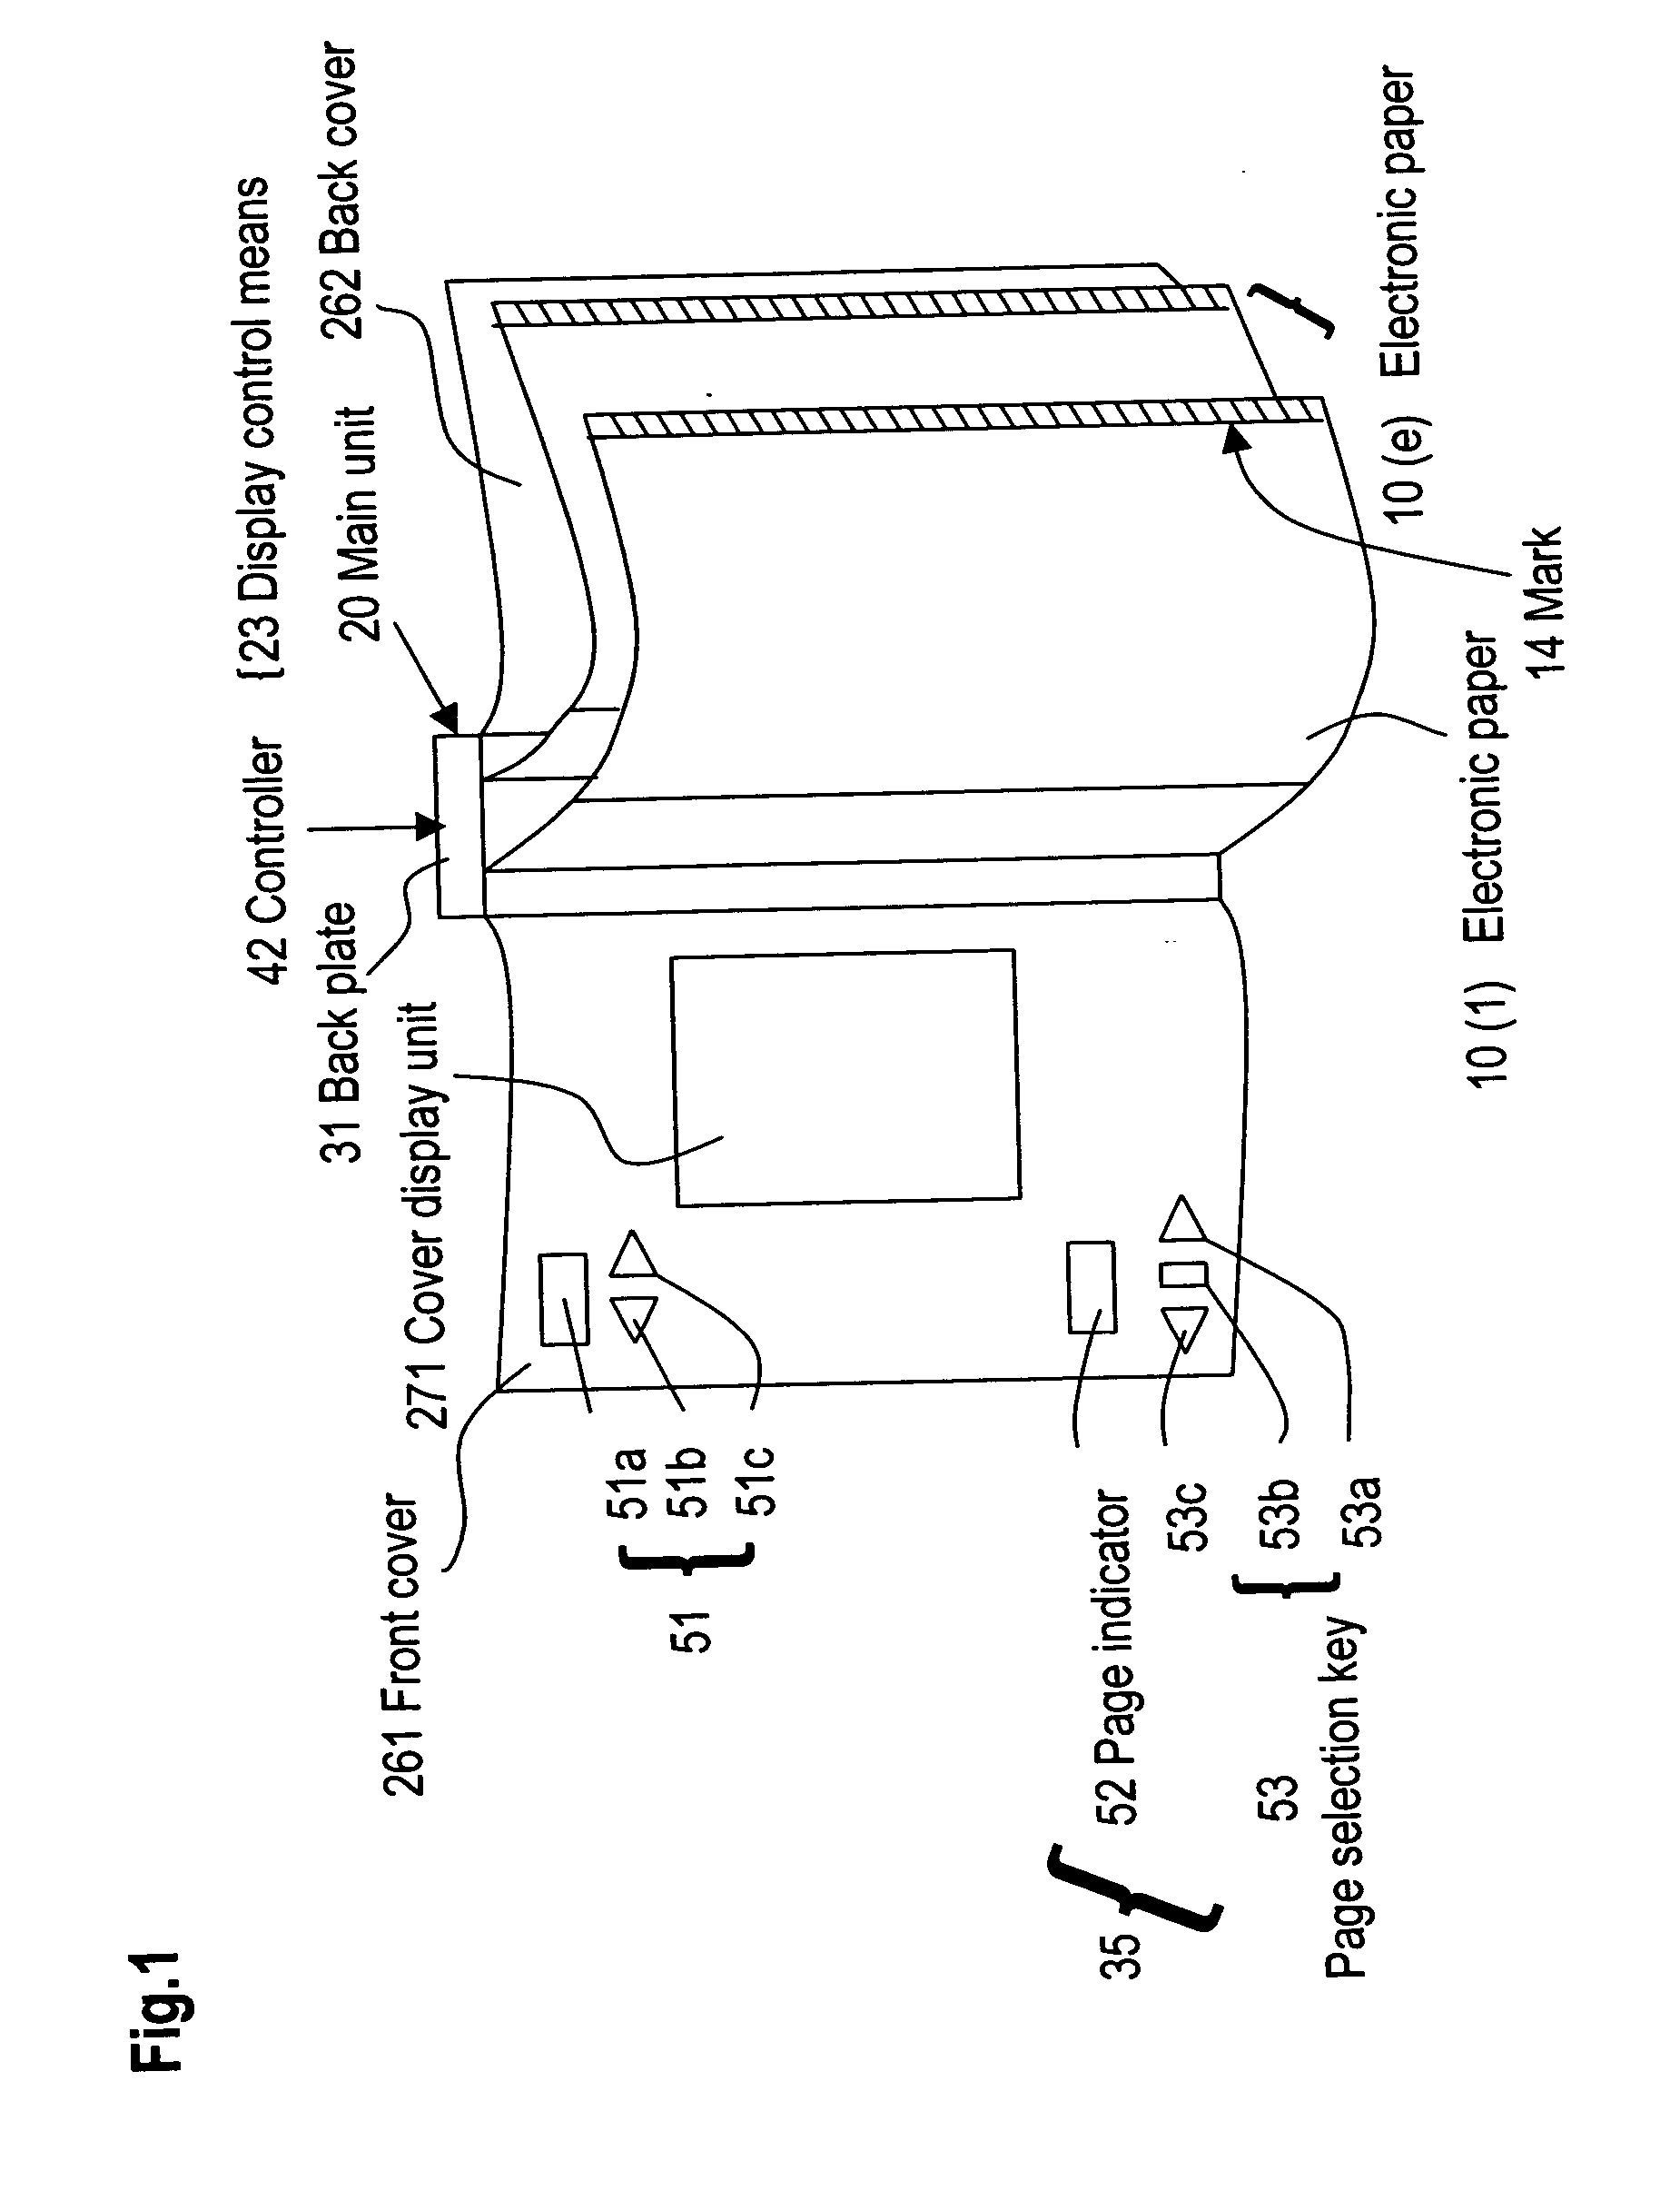 Electronic paper file and mark setting system